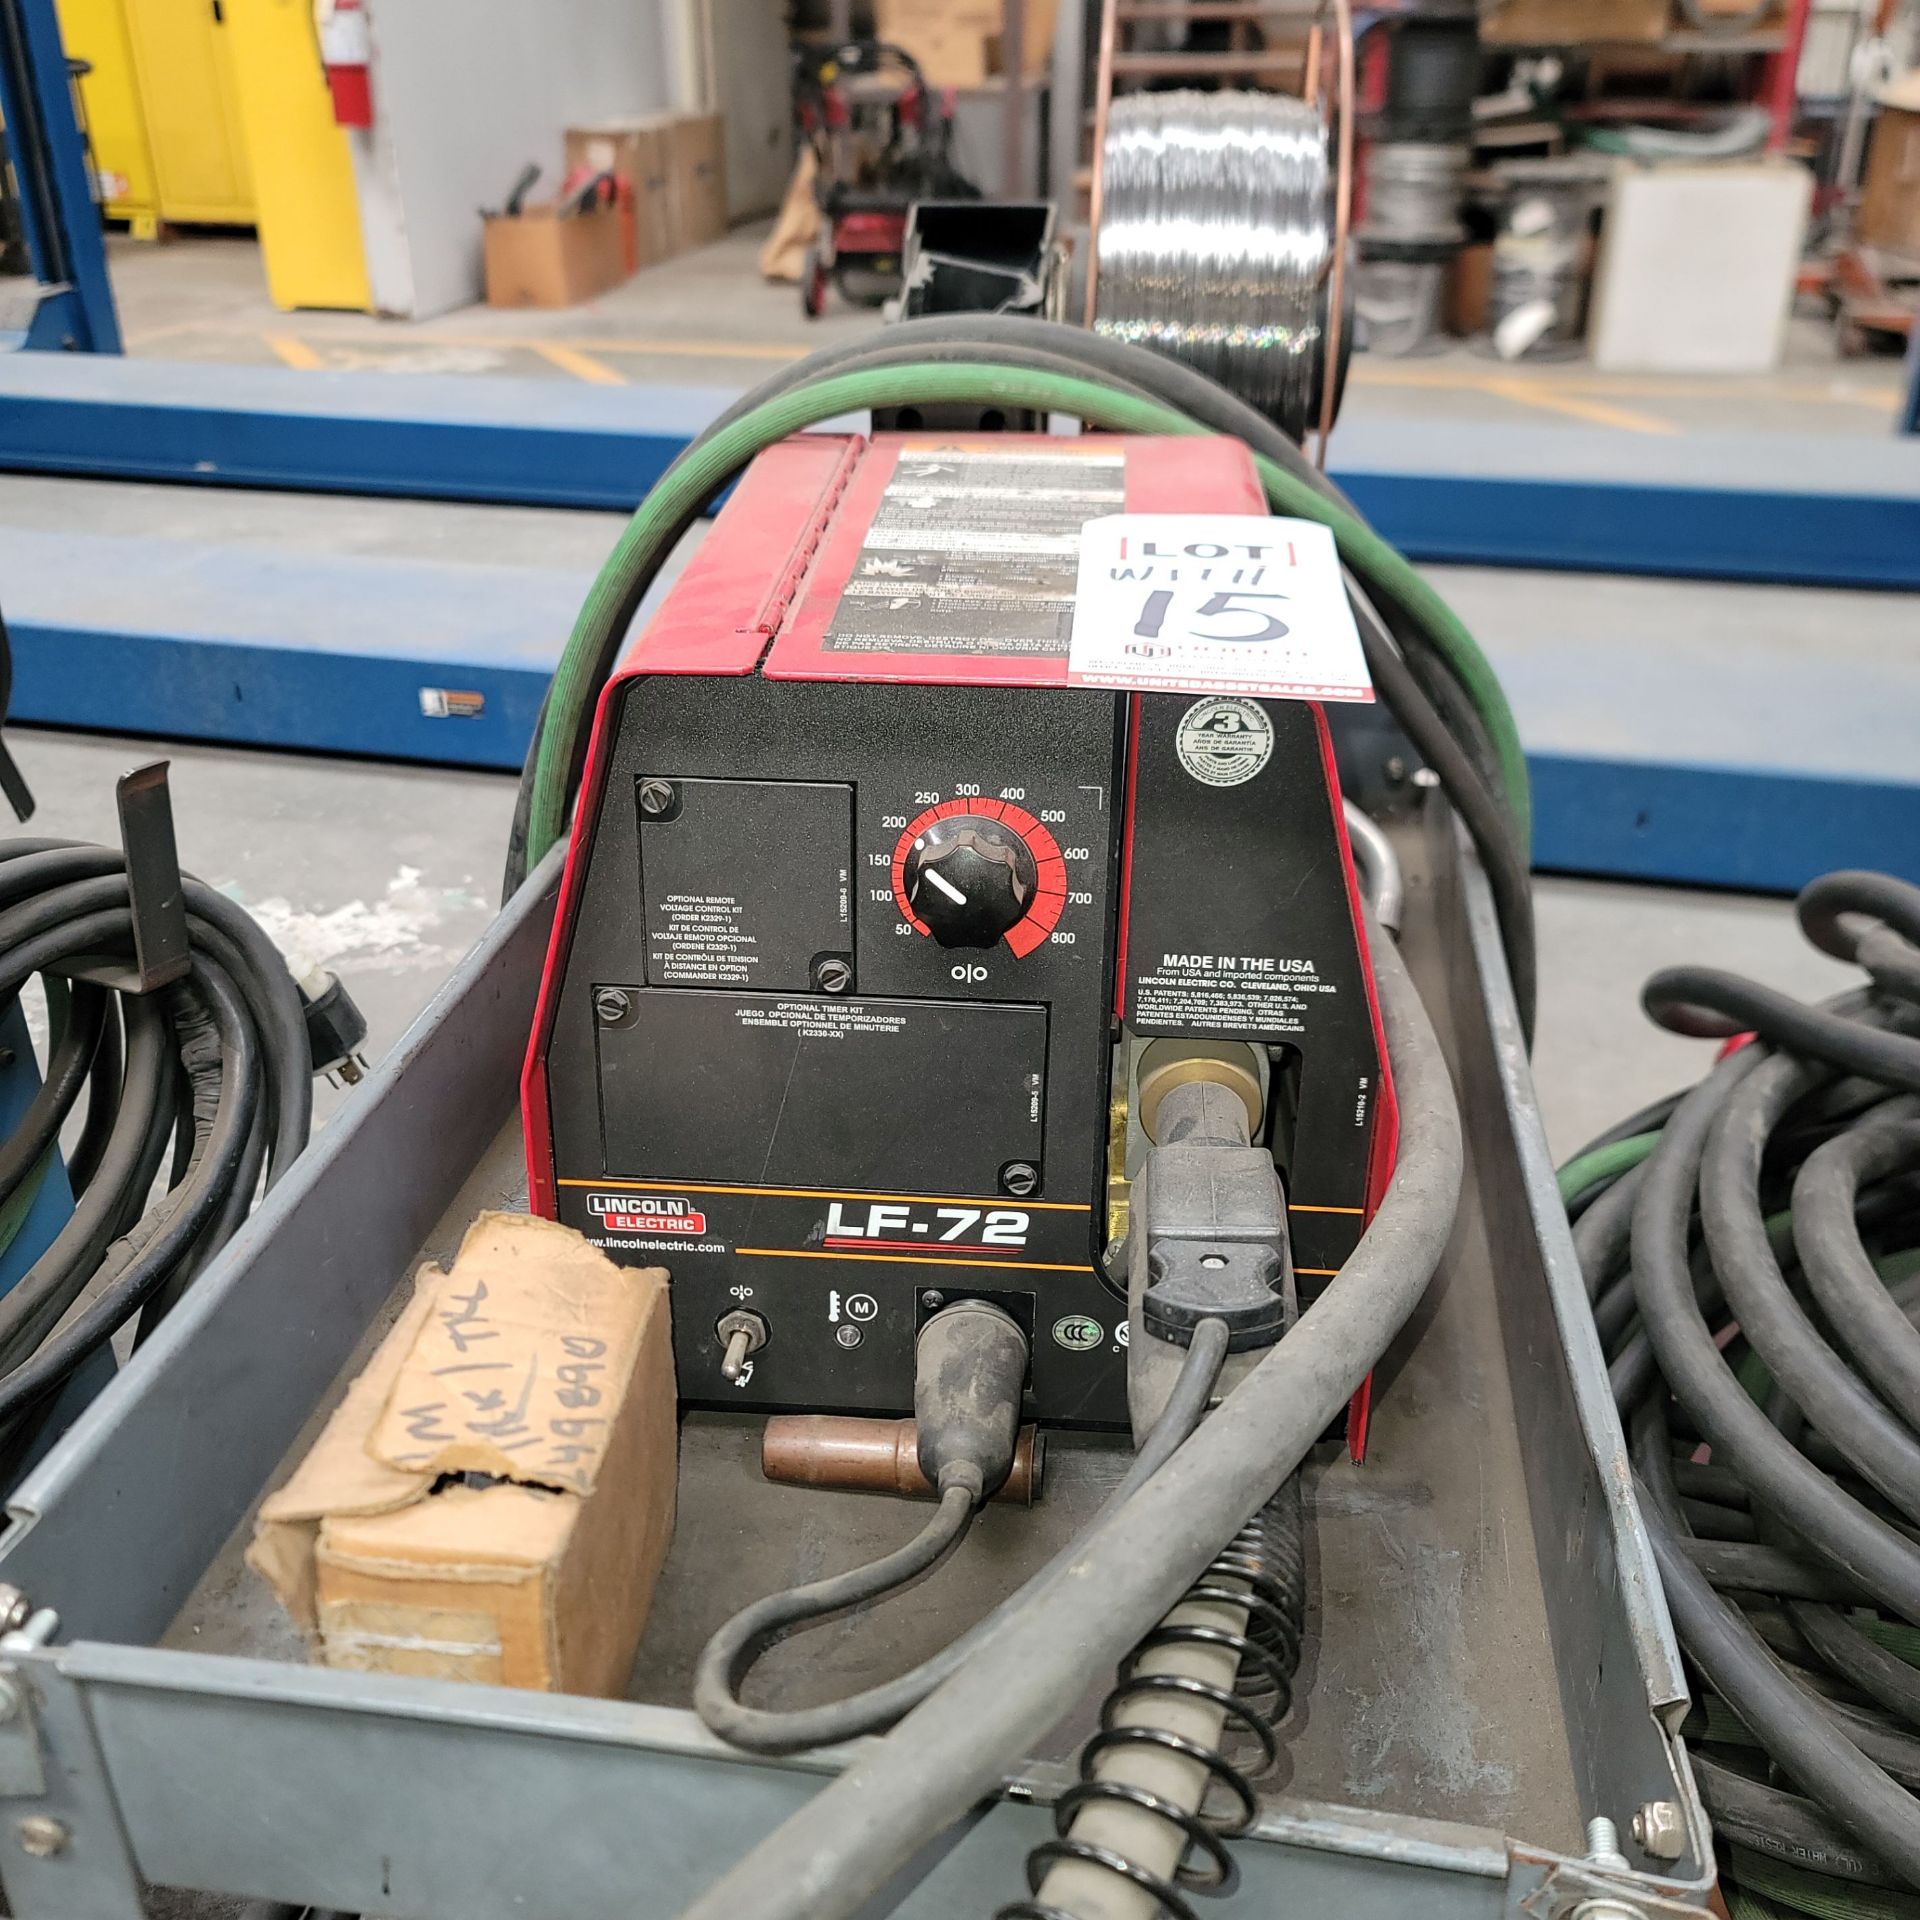 LINCOLN ELECTRIC IDEALARC CV305 WELDING POWER SOURCE, W/ LINCOLN ELECTRIC LF-72 WIRE FEEDER, K2400- - Image 3 of 5